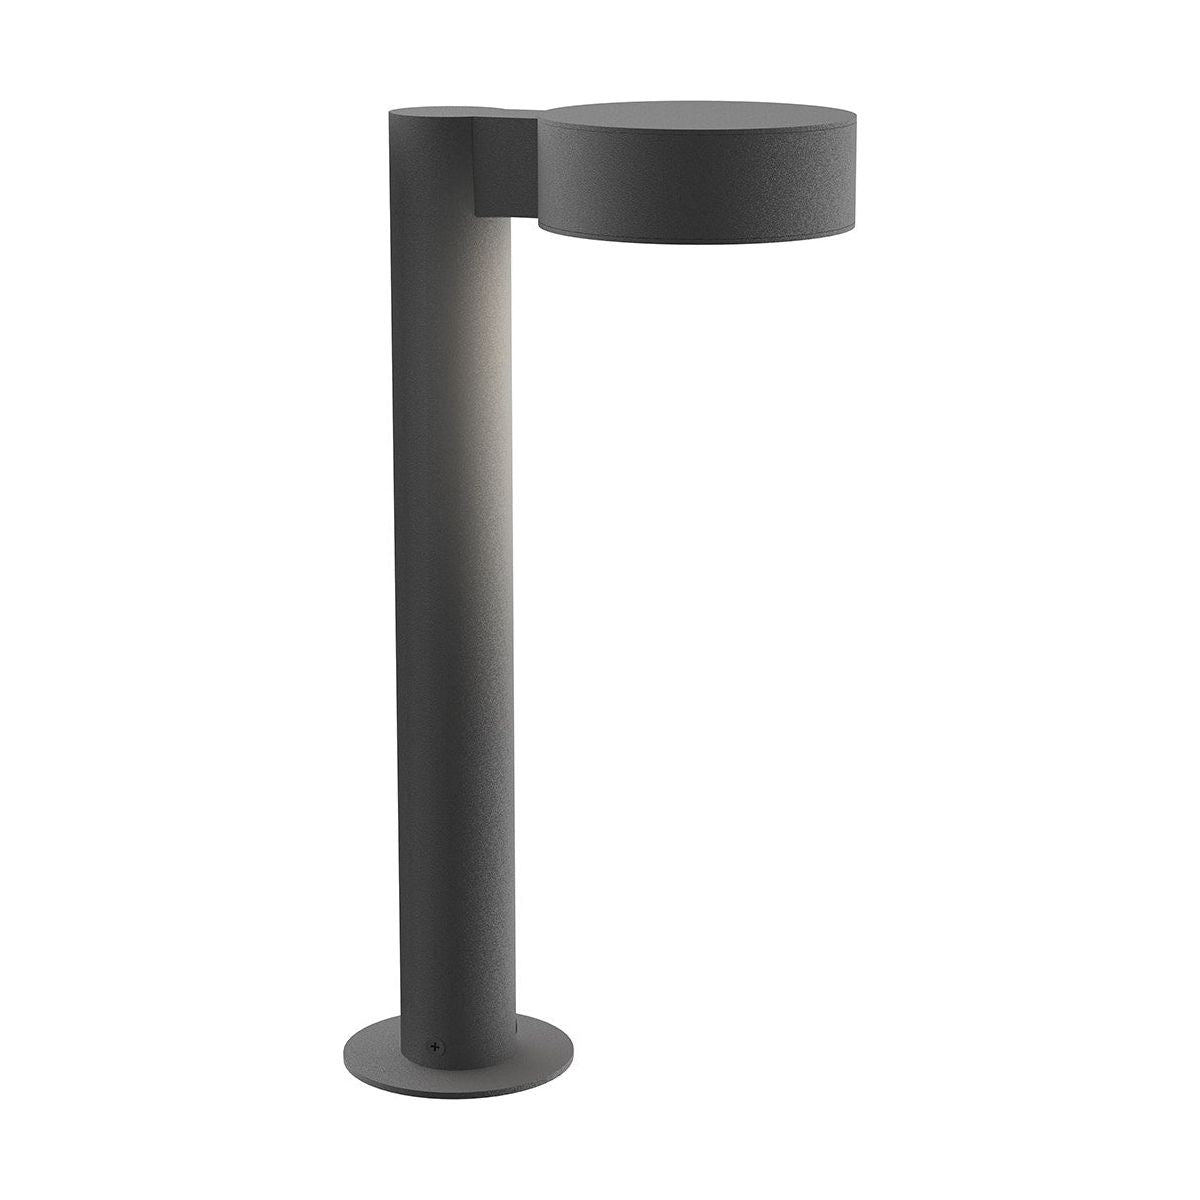 REALS 16" LED Bollard with Plate Cap and Plate Lens